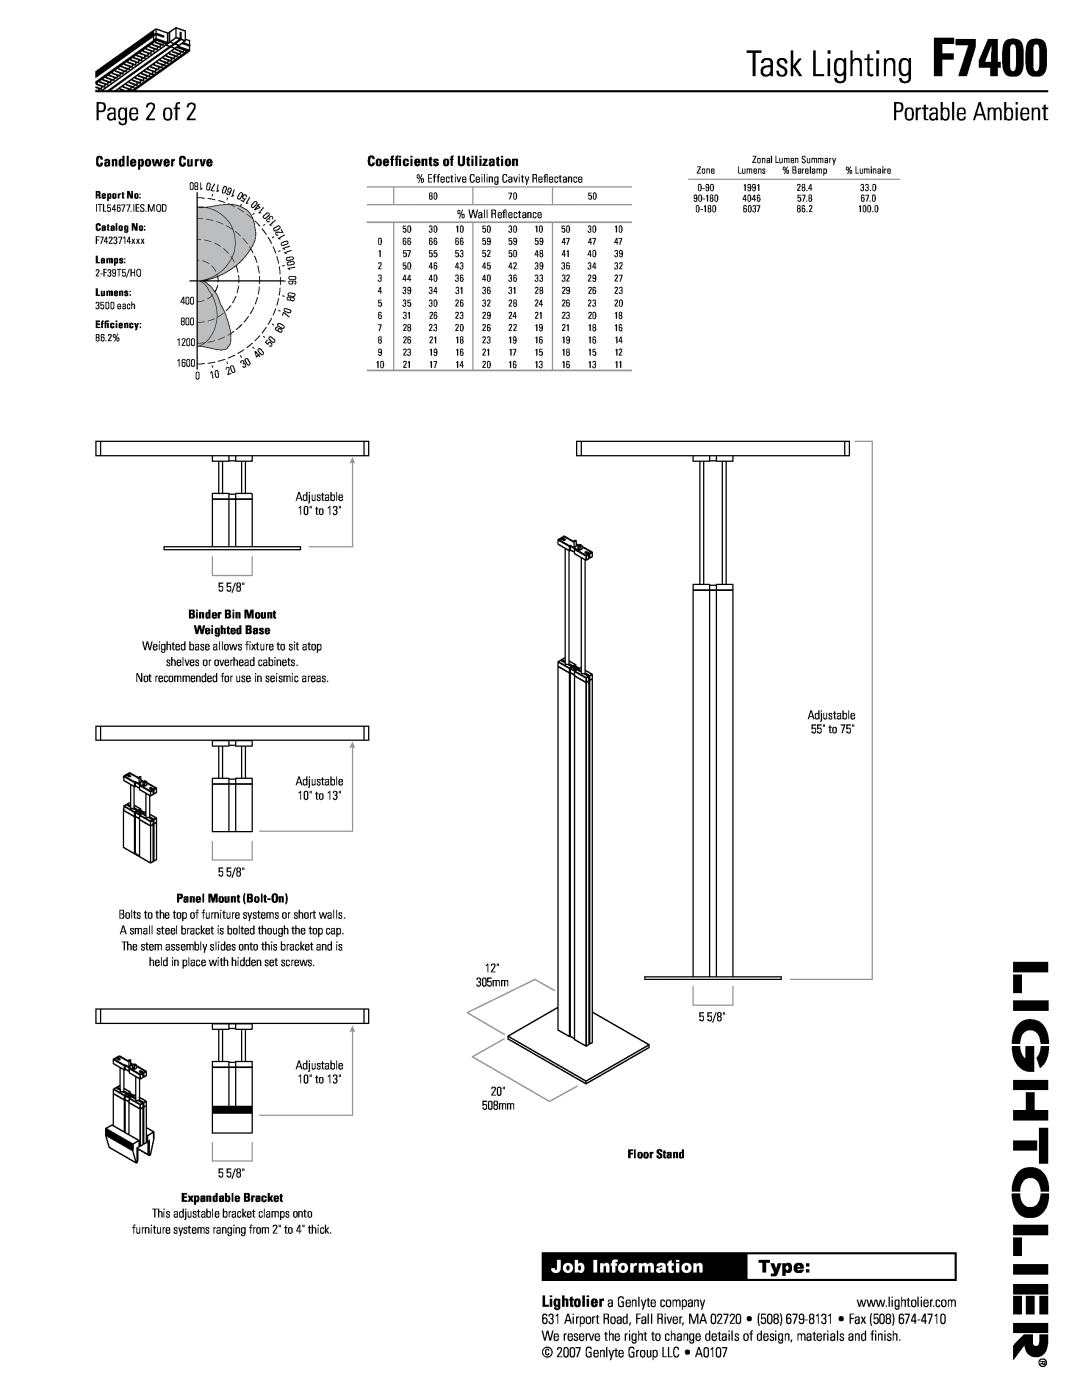 Lightolier specifications Page, Task Lighting F7400, Portable Ambient, Job Information, Type 